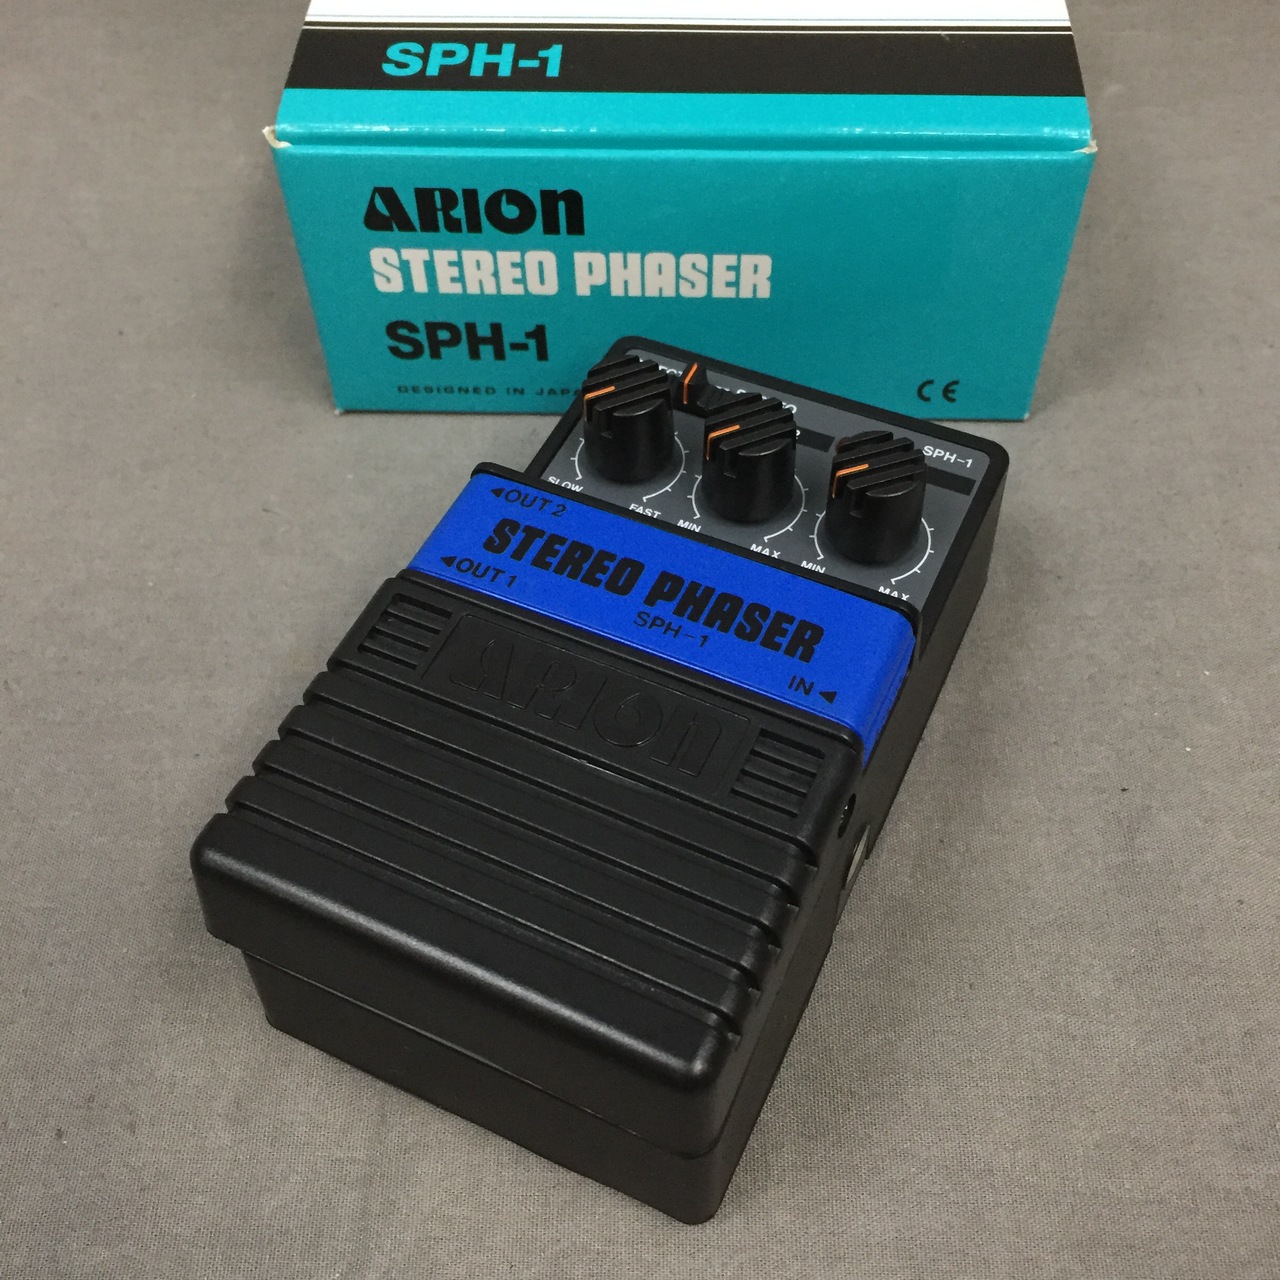 ARION STEREO PHASER SPH-1Satoeffectors - ギター